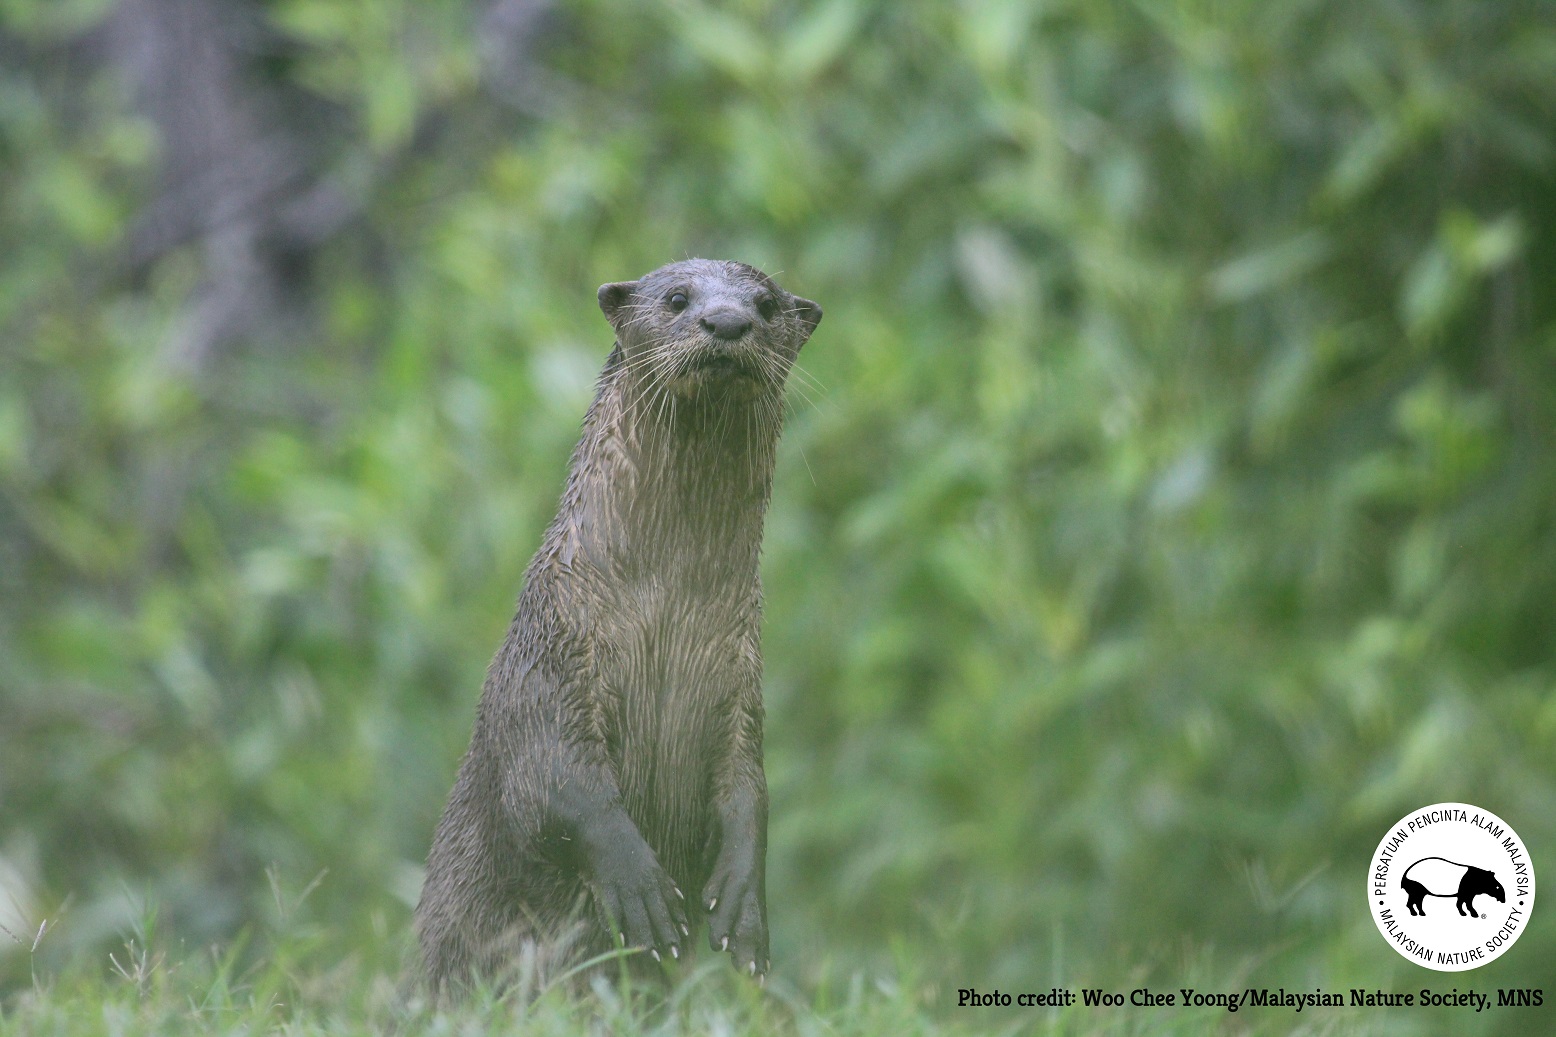 The smooth-coated otter in the Kuala Selangor Nature Park, Selangor